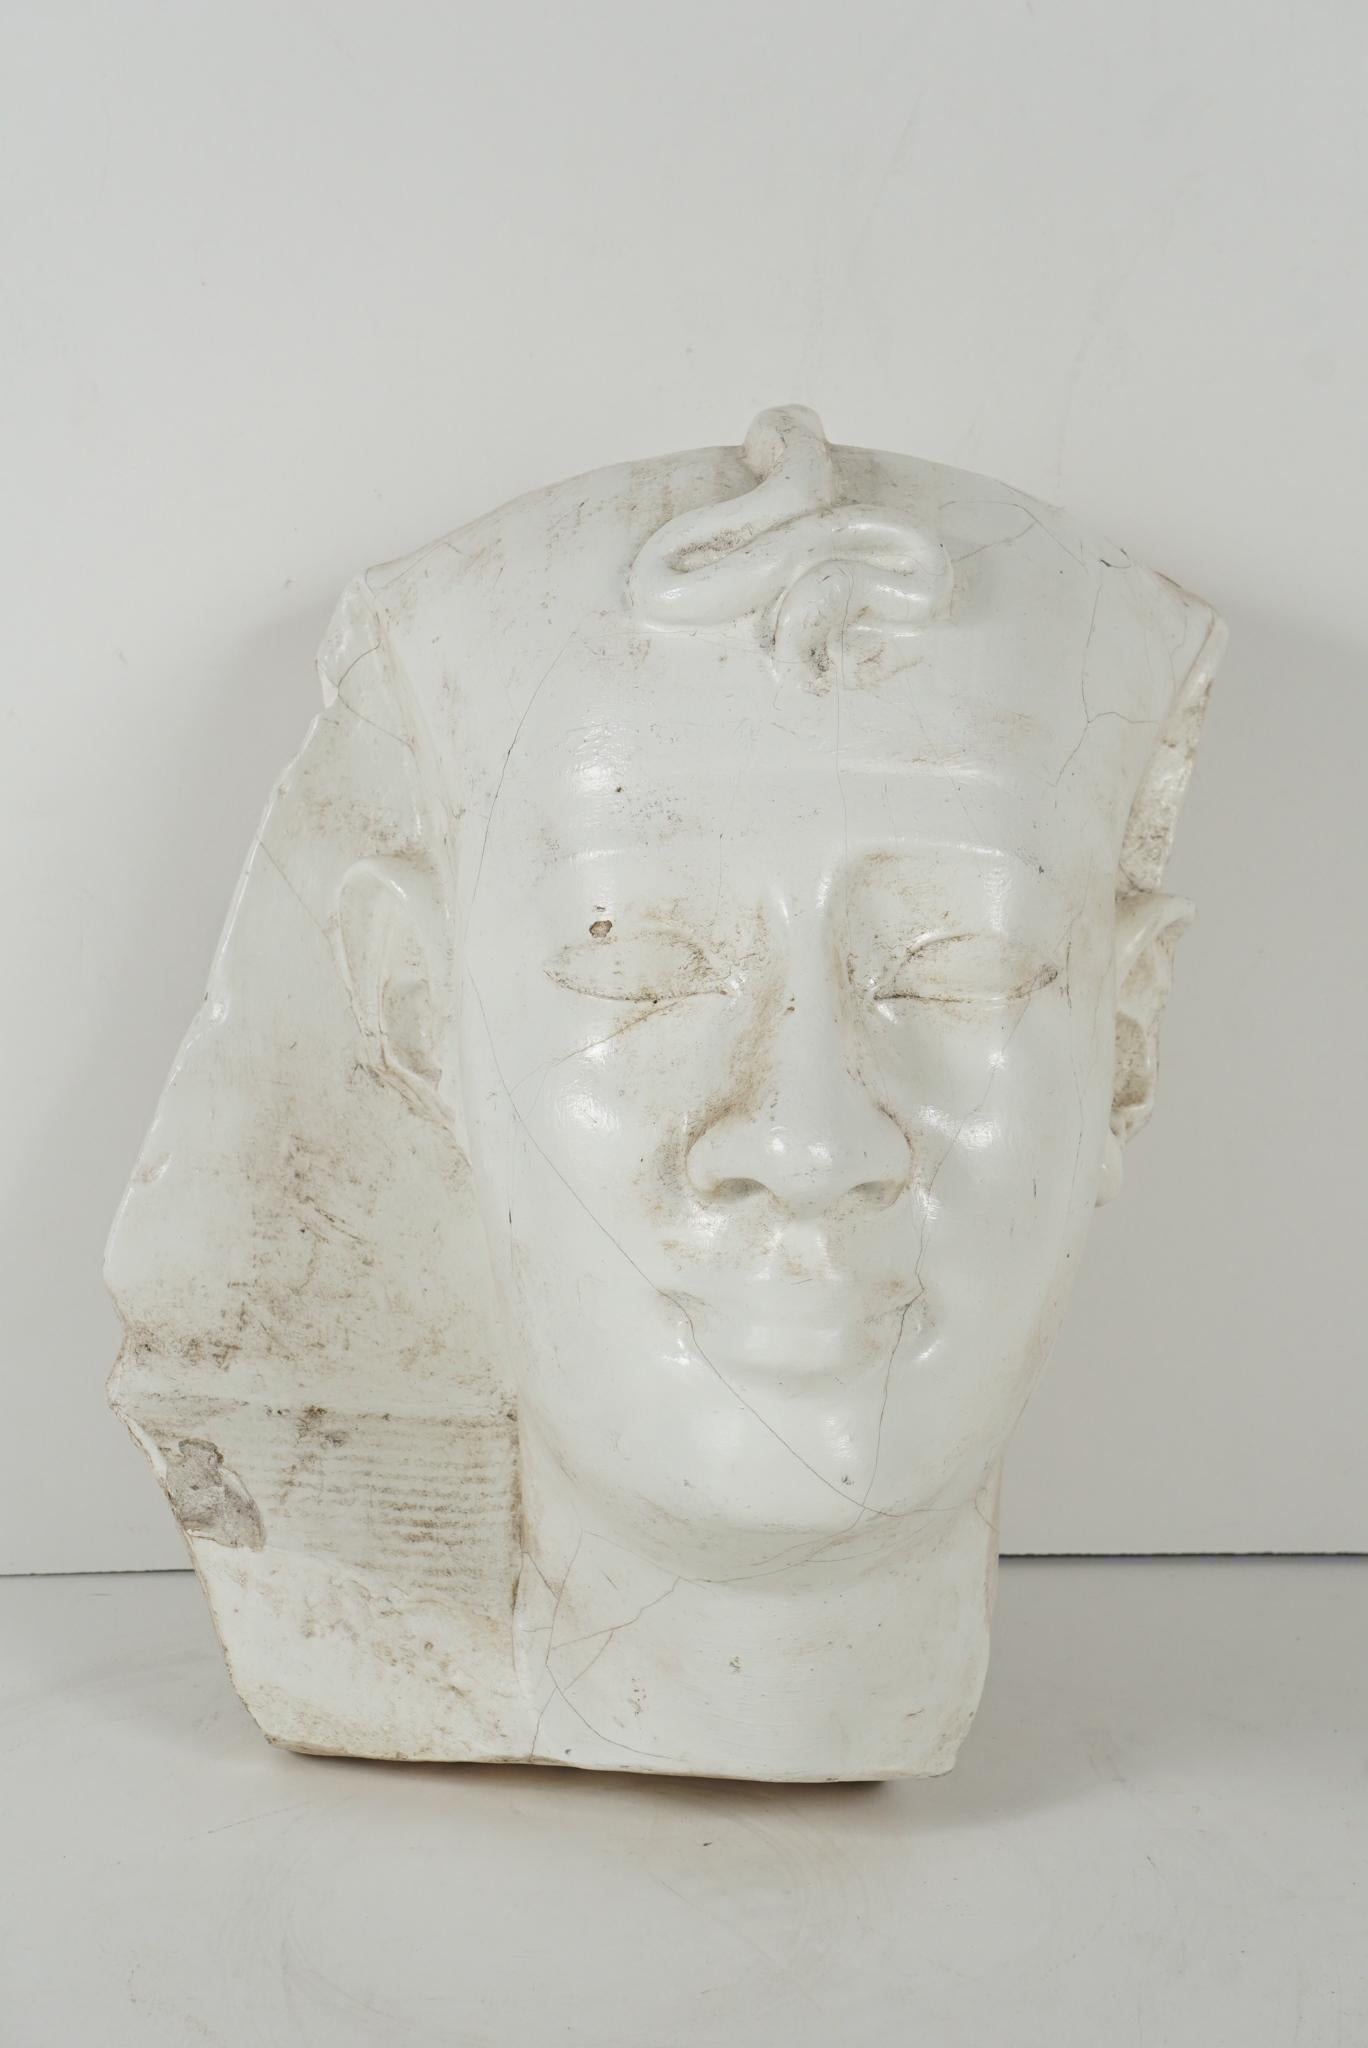 This life-size cast plaster head of a Pharaoh was made in the first quarter of the 20th century. While the discovery by Howard Carter of the undisturbed tomb of King Tut in 1922 certainly led to Egyptian fever, Egyptology and an interest in the Nile